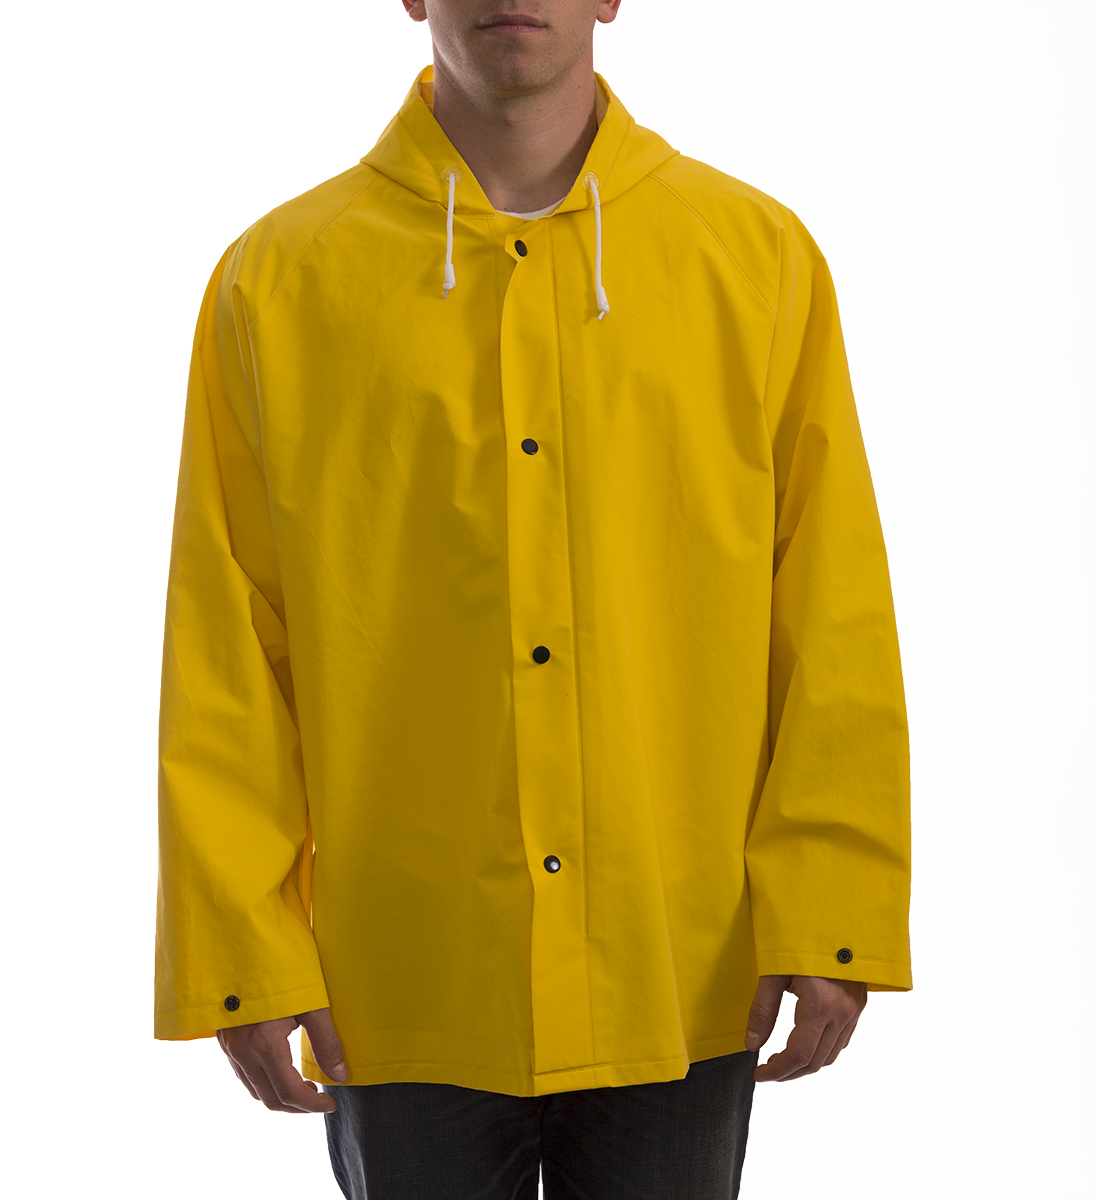 Industrial Yellow Work Jacket with Attached Hood - Rain Wear